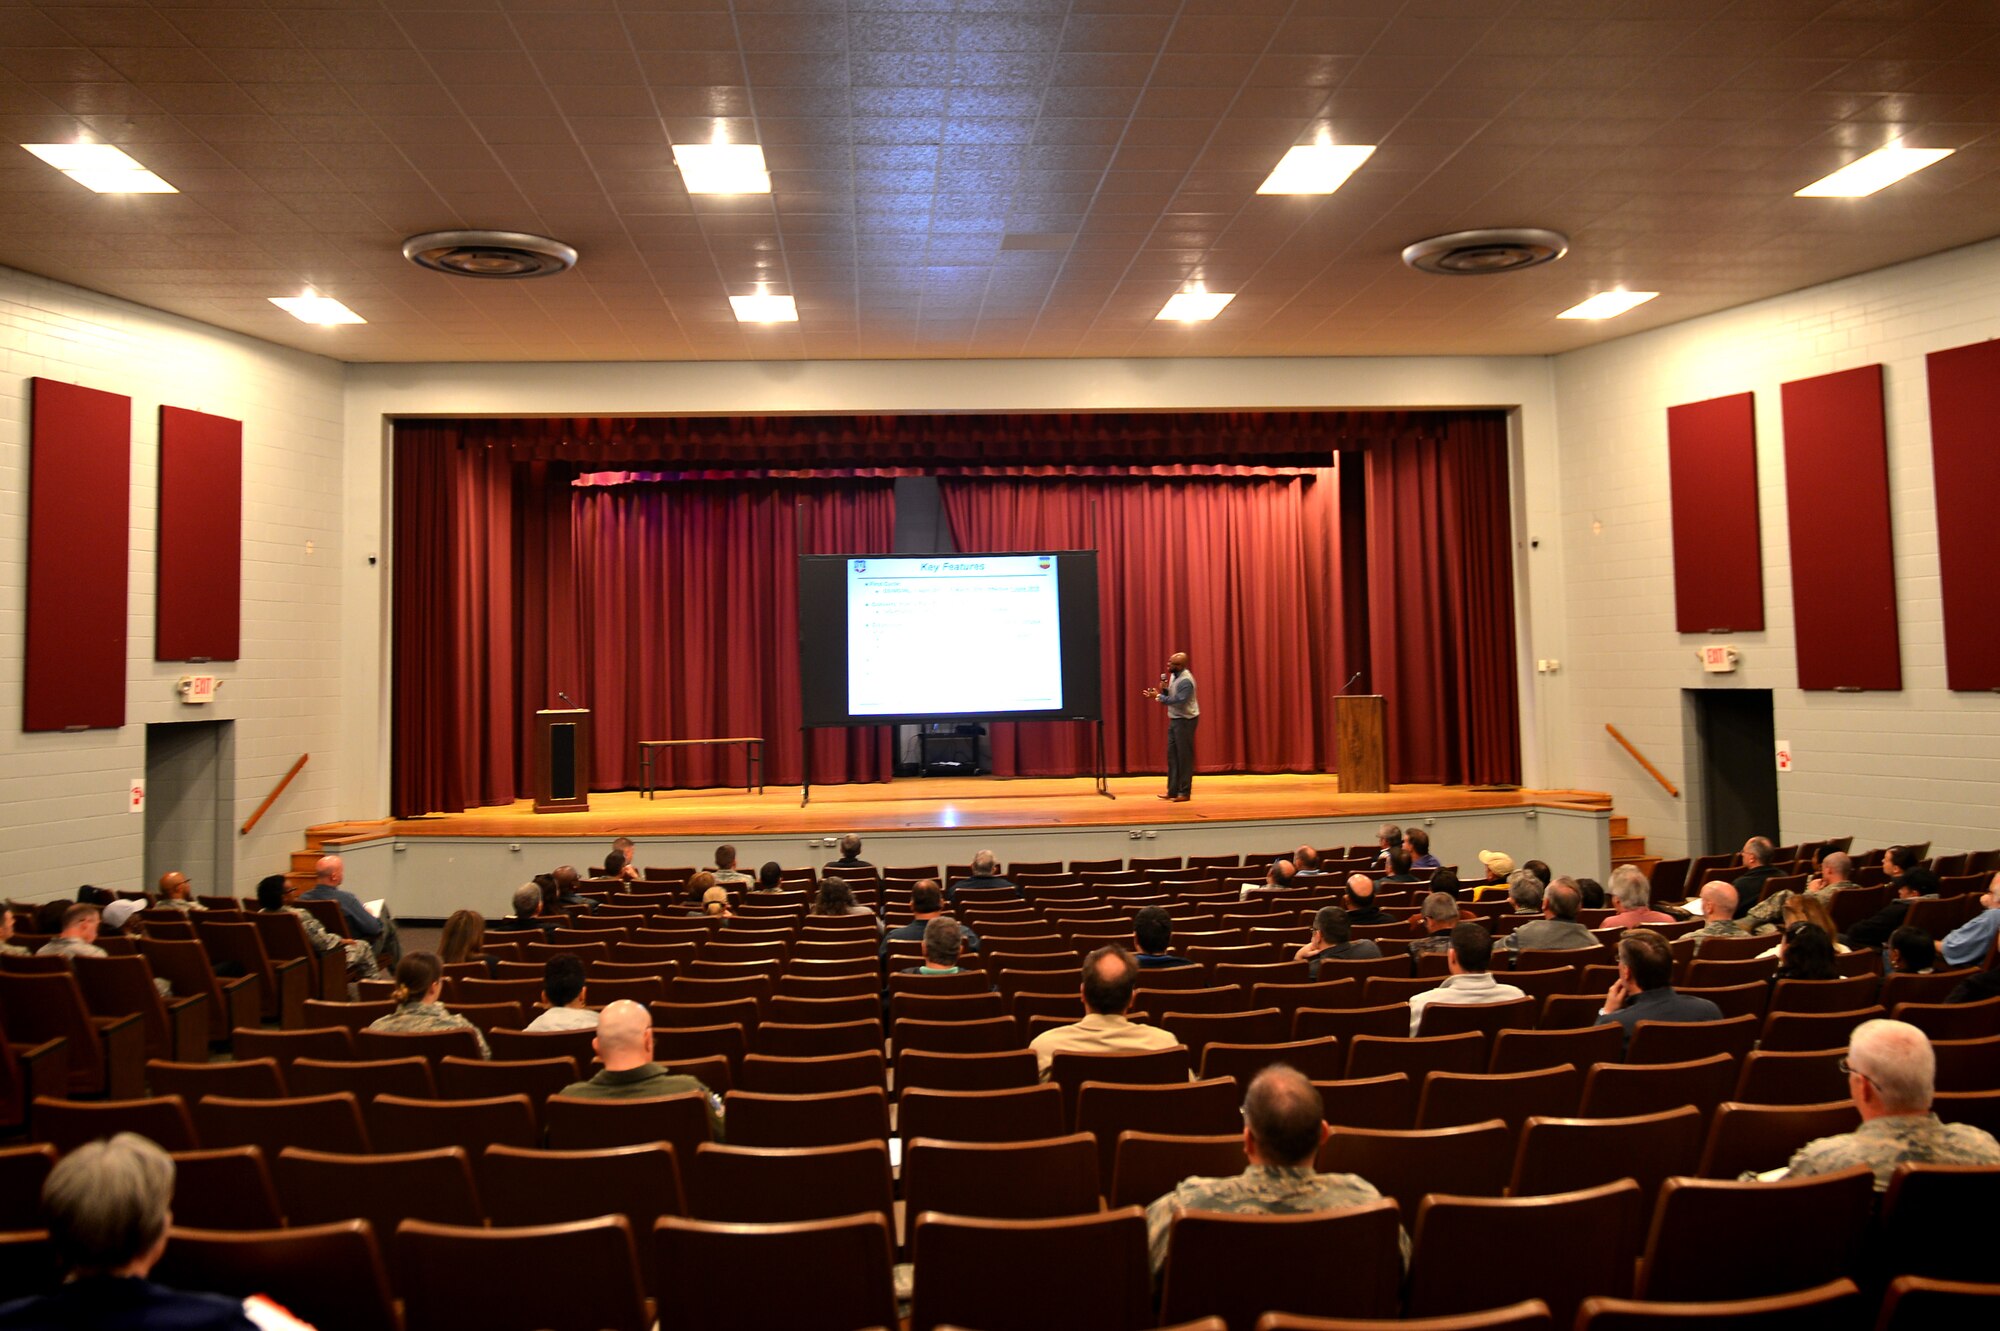 Team Shaw members attend a Civilian Appraisal System brief at Shaw Air Force Base, S.C., Feb. 7, 2017. Civilian employees assigned to Shaw were briefed on the “New Beginnings” appraisal system which begins April 1. The system will be comprised of a five-three-one rating system as opposed to the current pass or fail rating system. (U.S. Air Force photo by Airman 1st Class Christopher Maldonado)